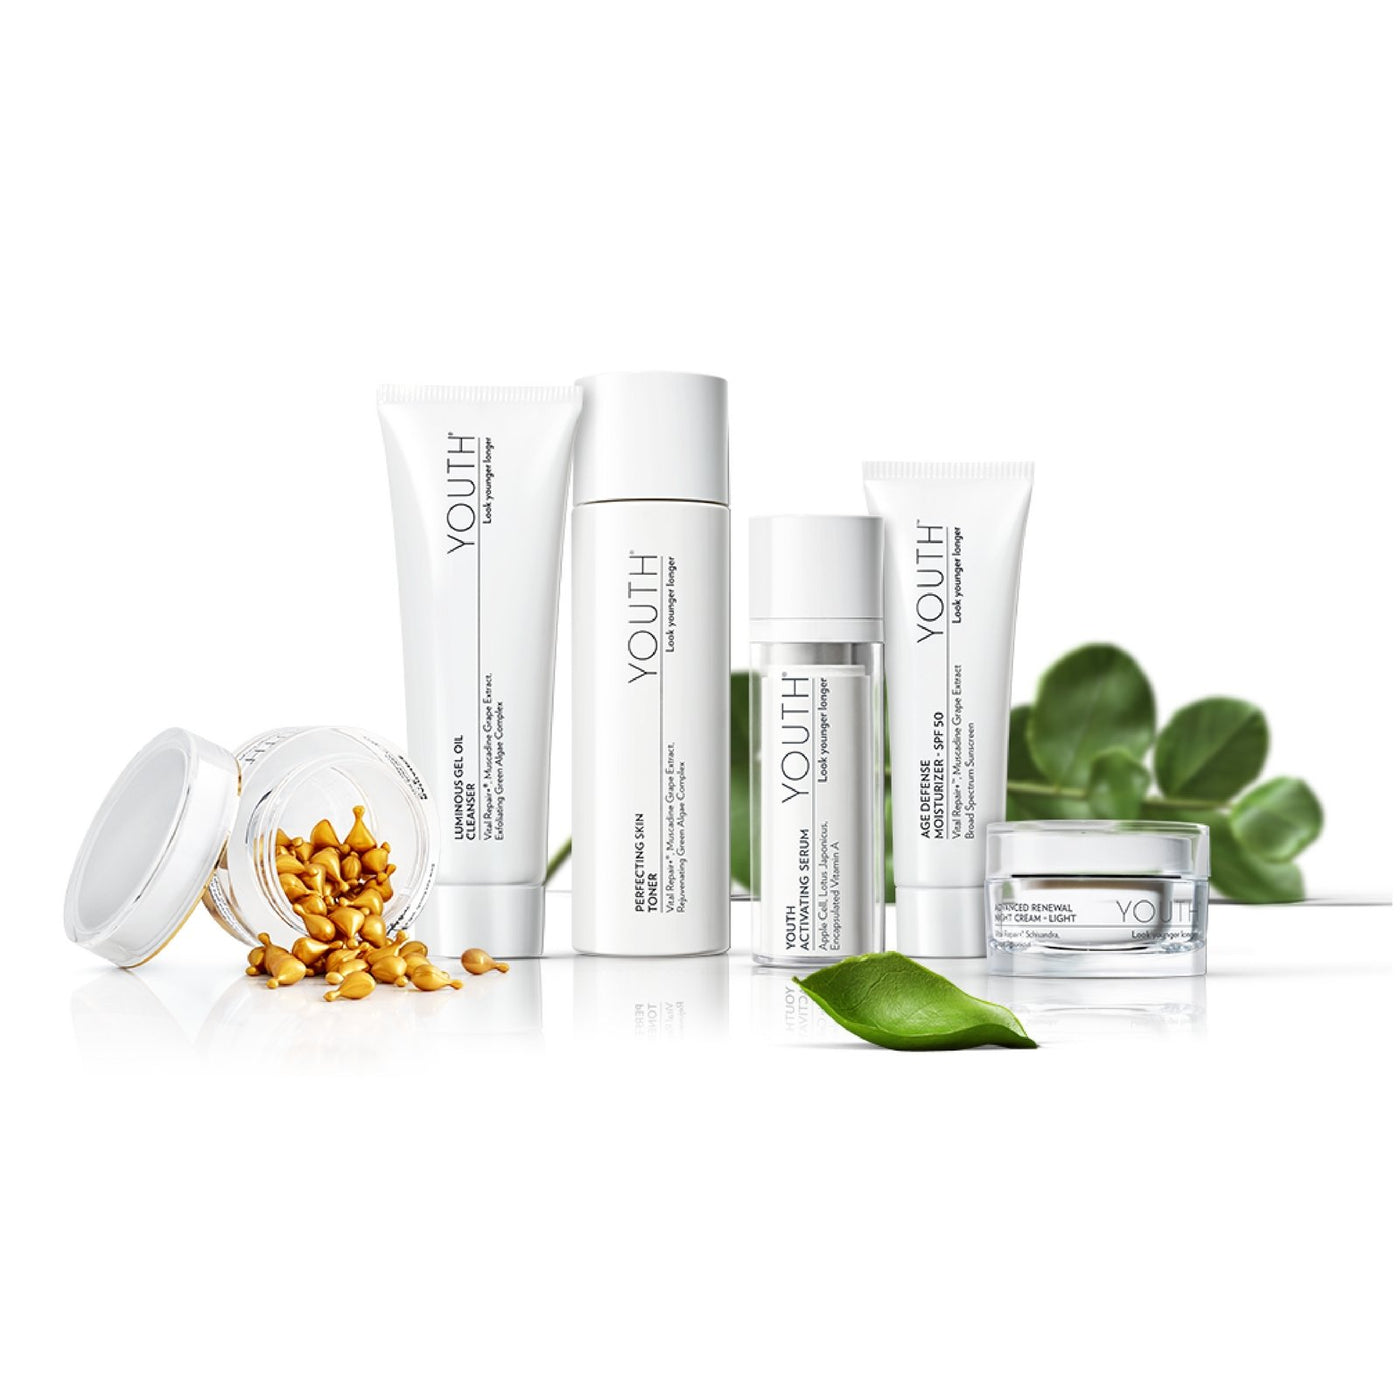 Shaklee YOUTH collection